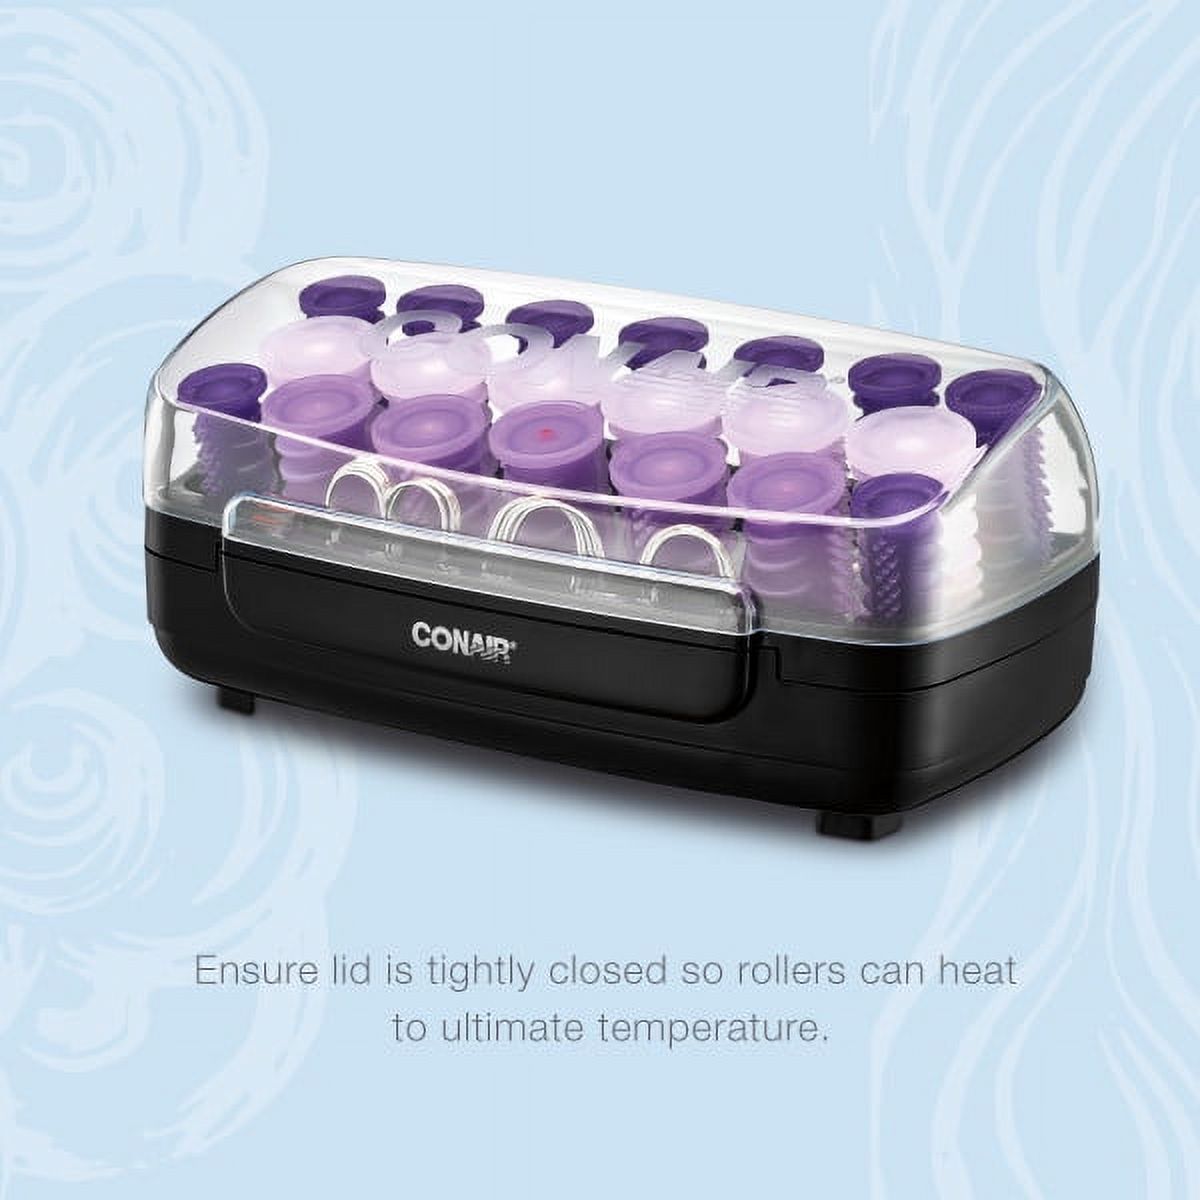 Conair EasyStart Hot Rollers, Create Curls and Waves That Last with 20 Assorted Hot Rollers and 20 Metal Pins, HS11RX - image 3 of 7